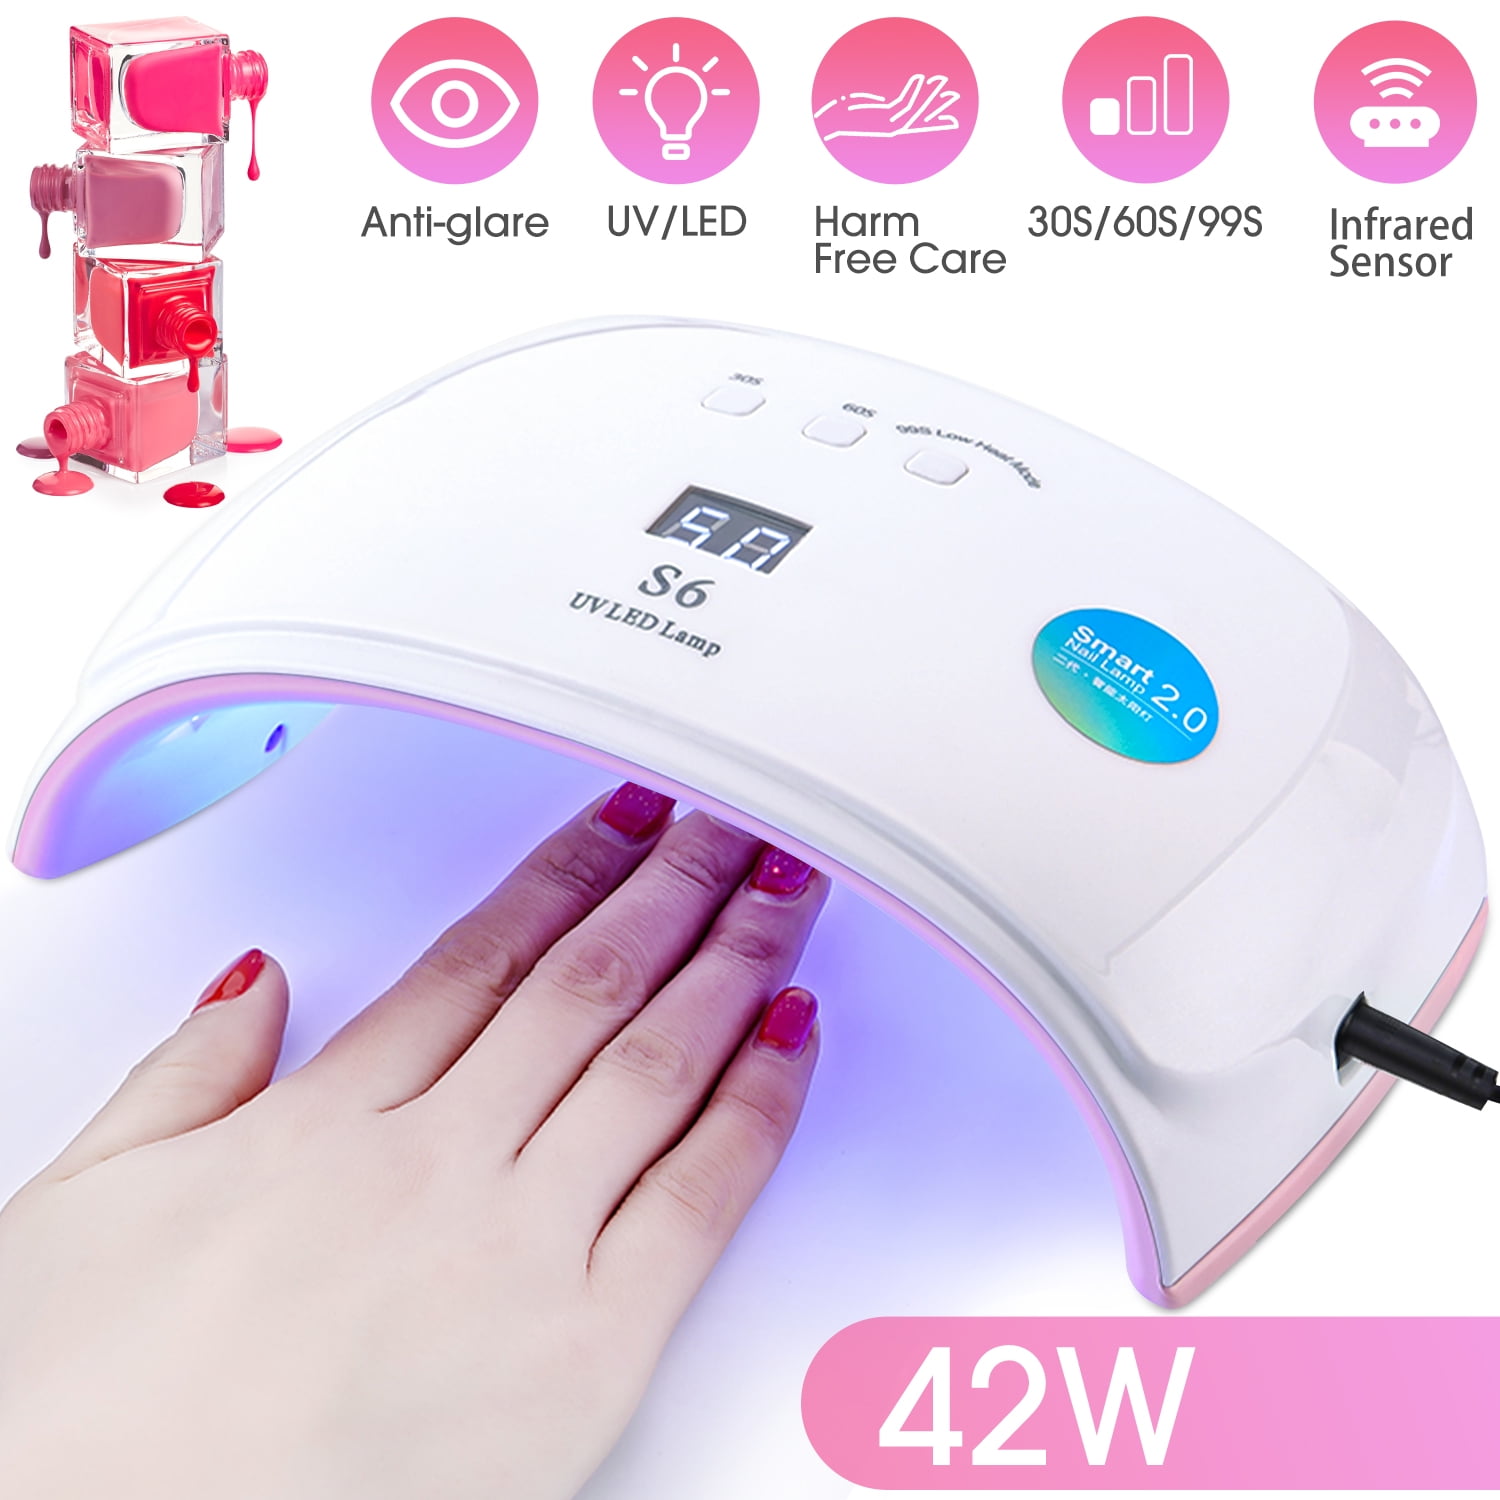 For pokker mandskab Eddike UV LED Nail Lamp, 42W Nail Dryer Gel Nail Light for Nail Polish, Light  Curing in 3 Modes for Time, for Manicure Pedicure Nail Art at Home -  Walmart.com